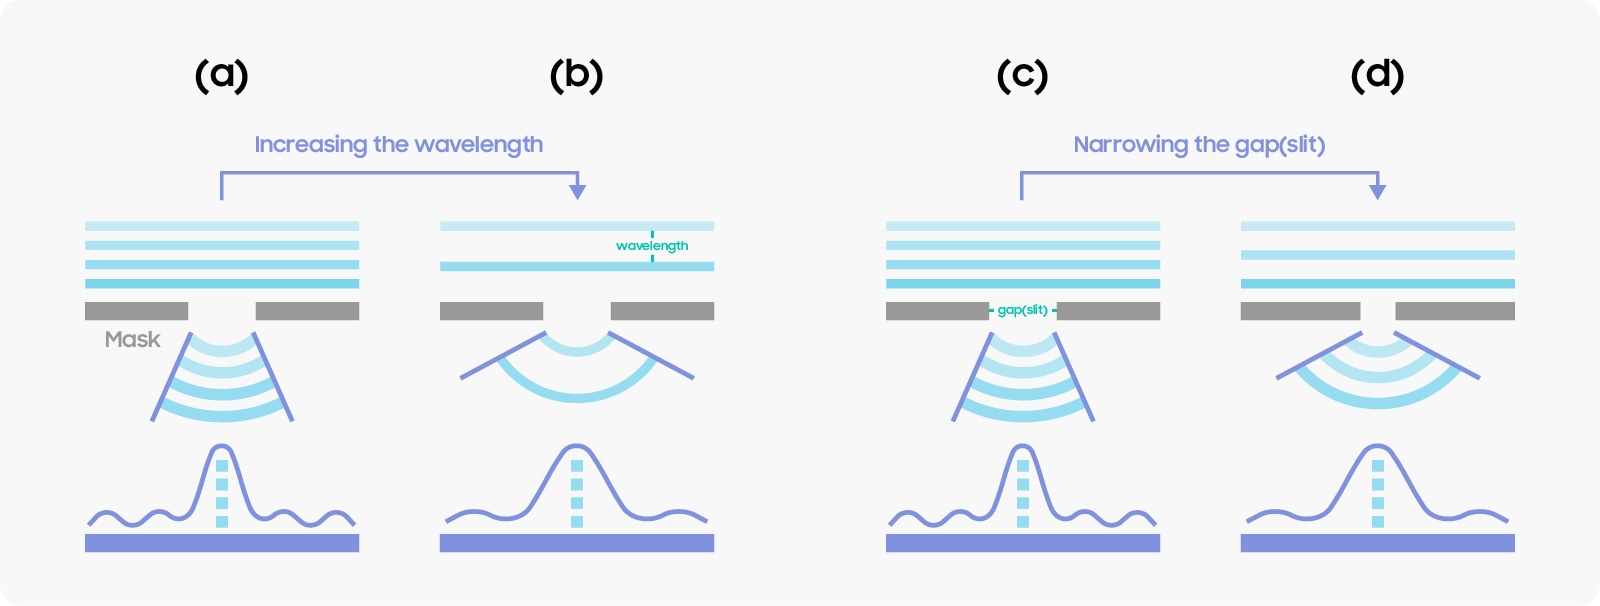 Figure [3] In the two cases above, increased diffraction causes the wavelength to spread out farther. (a) → (b): longer wavelength (c) → (d) narrower slit